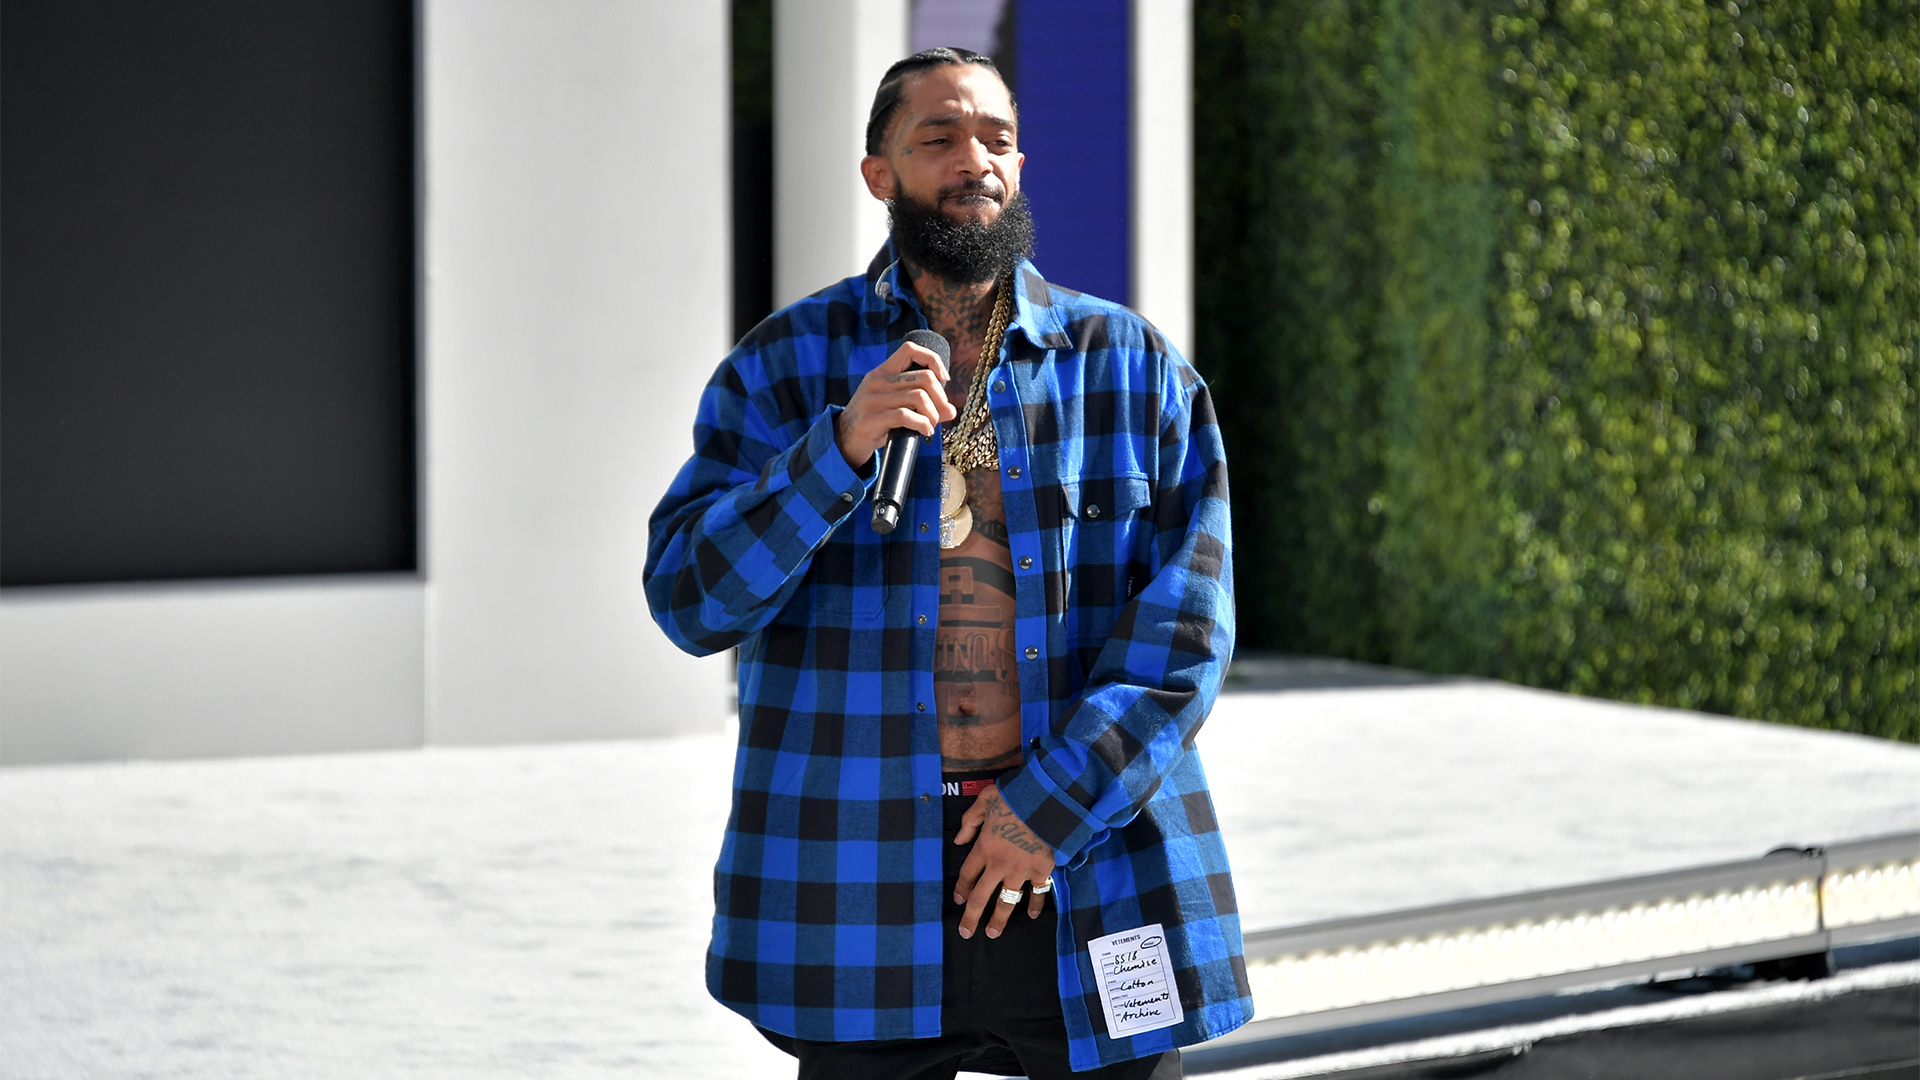 Unreleased Tracks From The Late Nipsey Hussle Said To Become Available Via NFTs